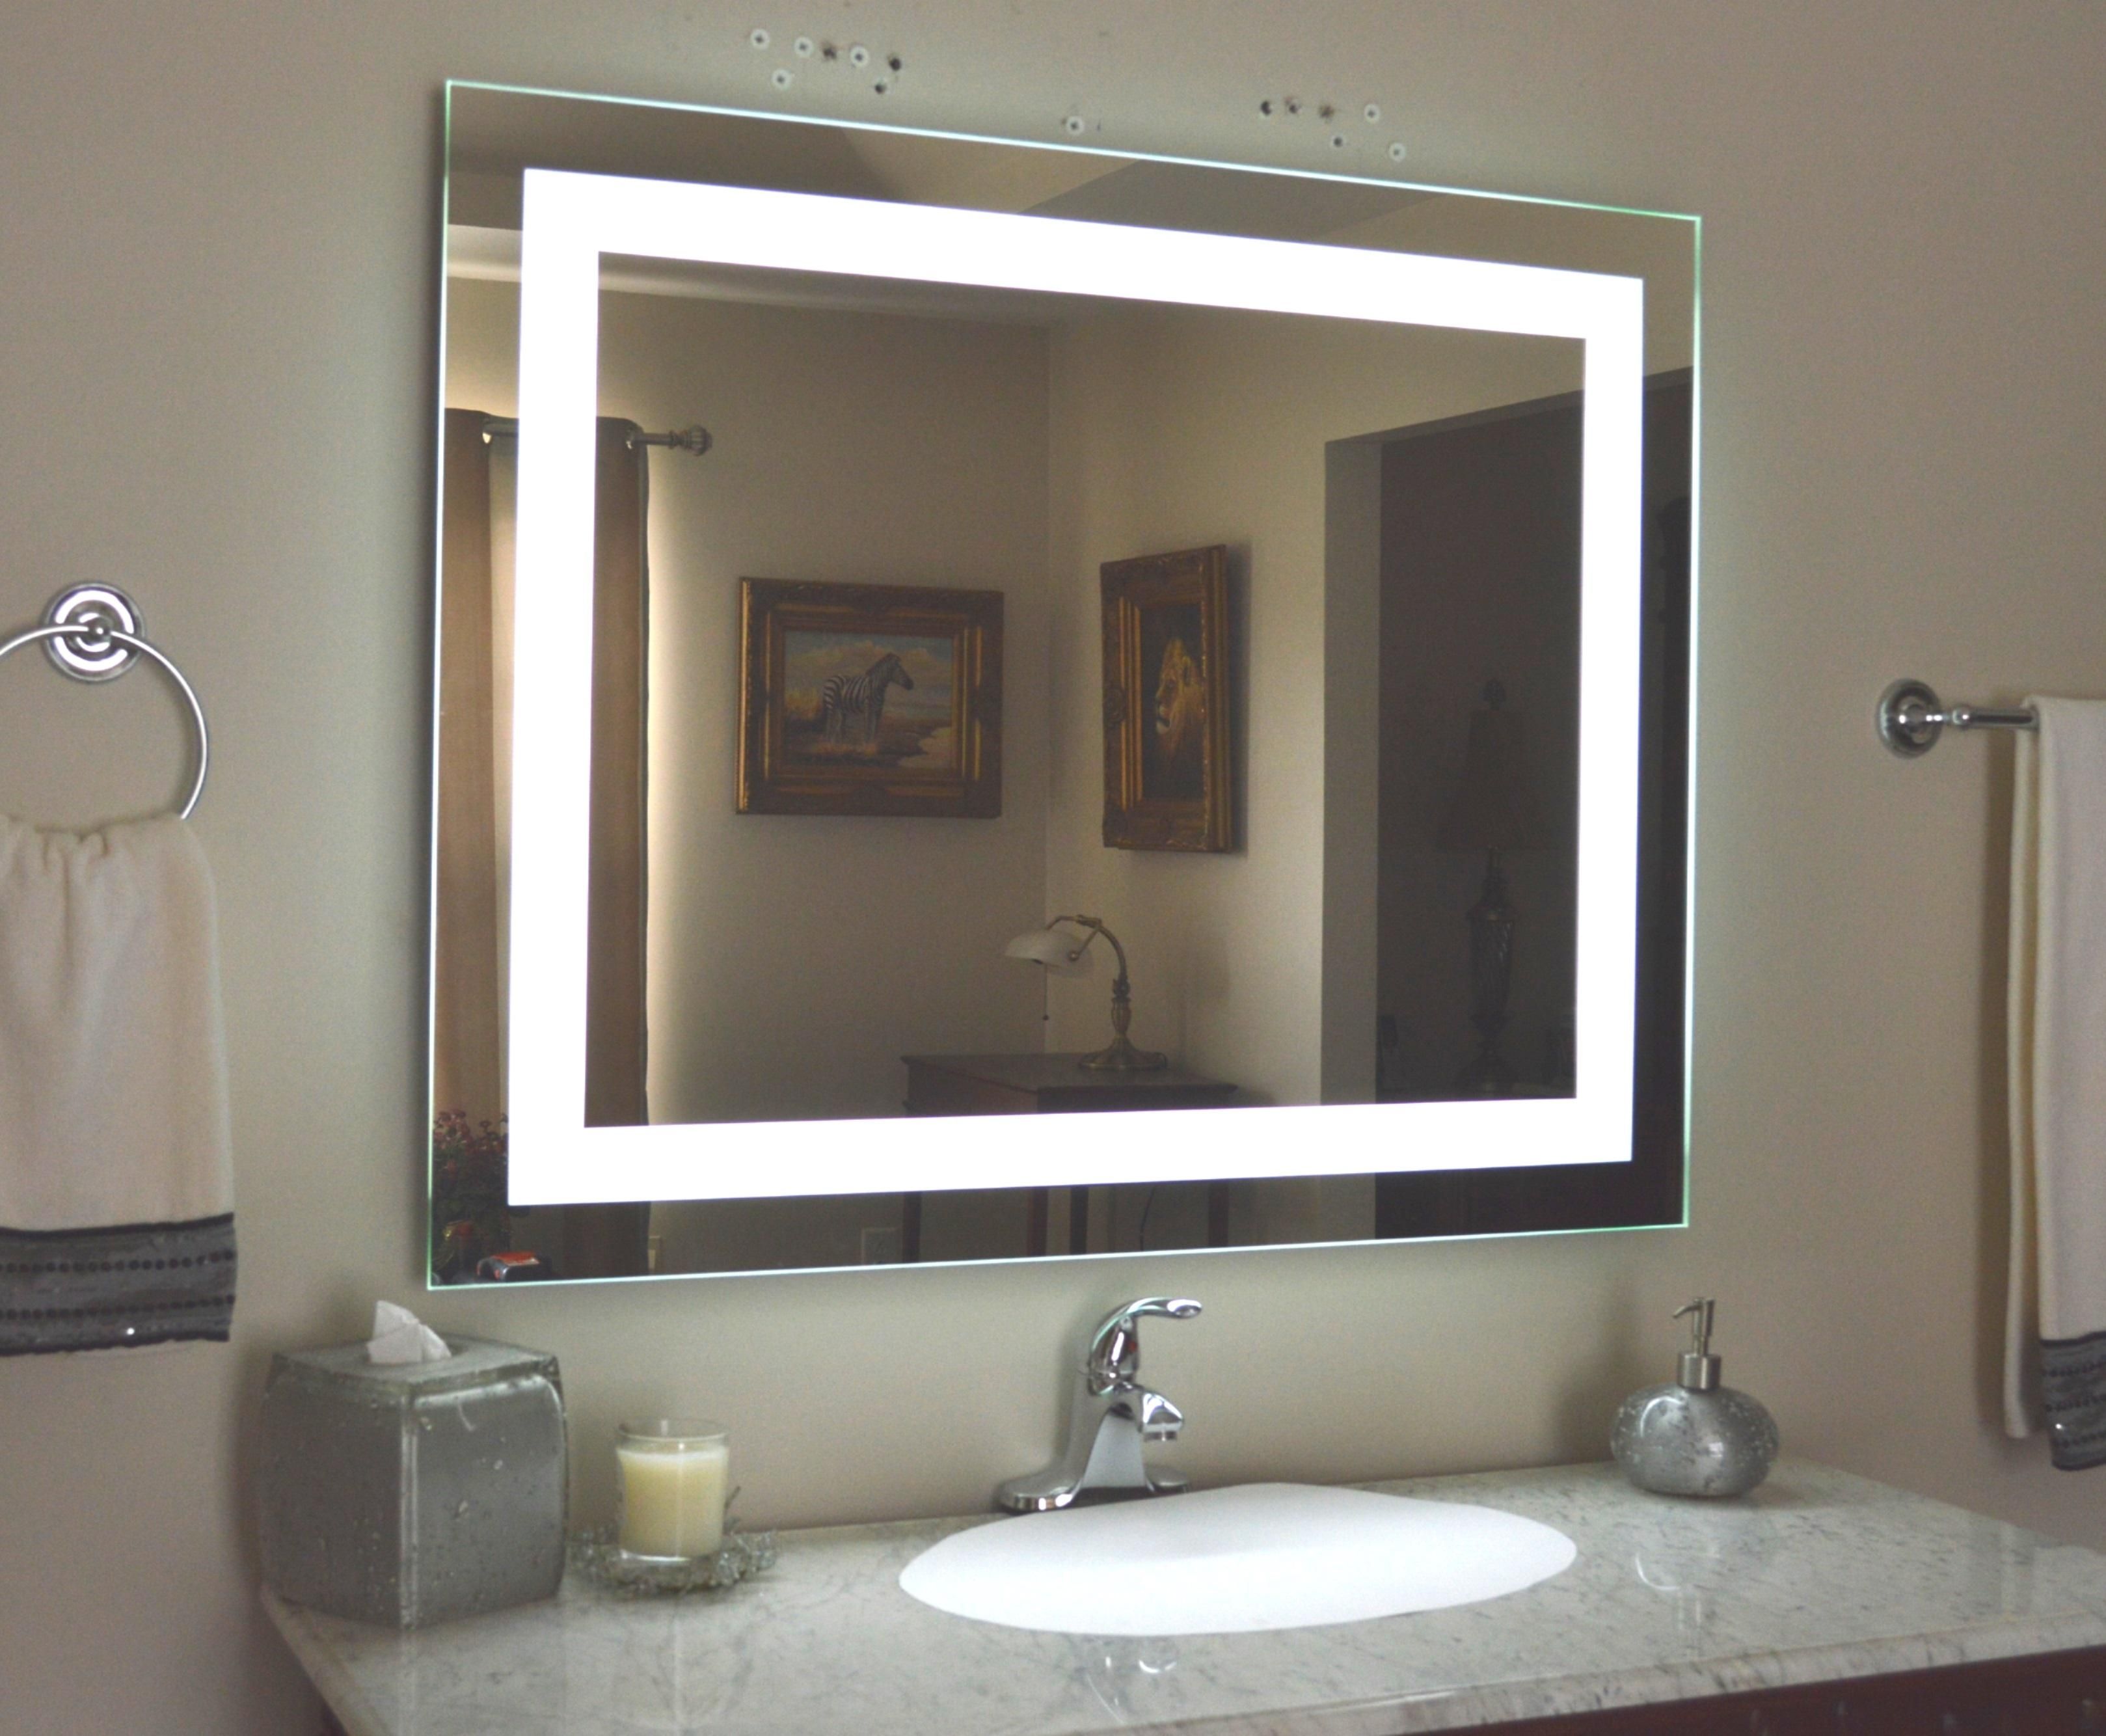 Outstanding Wall Mounted Makeup Mirror Polished Nickel Magnifying Pertaining To Magnifying Vanity Mirrors For Bathroom (View 9 of 20)